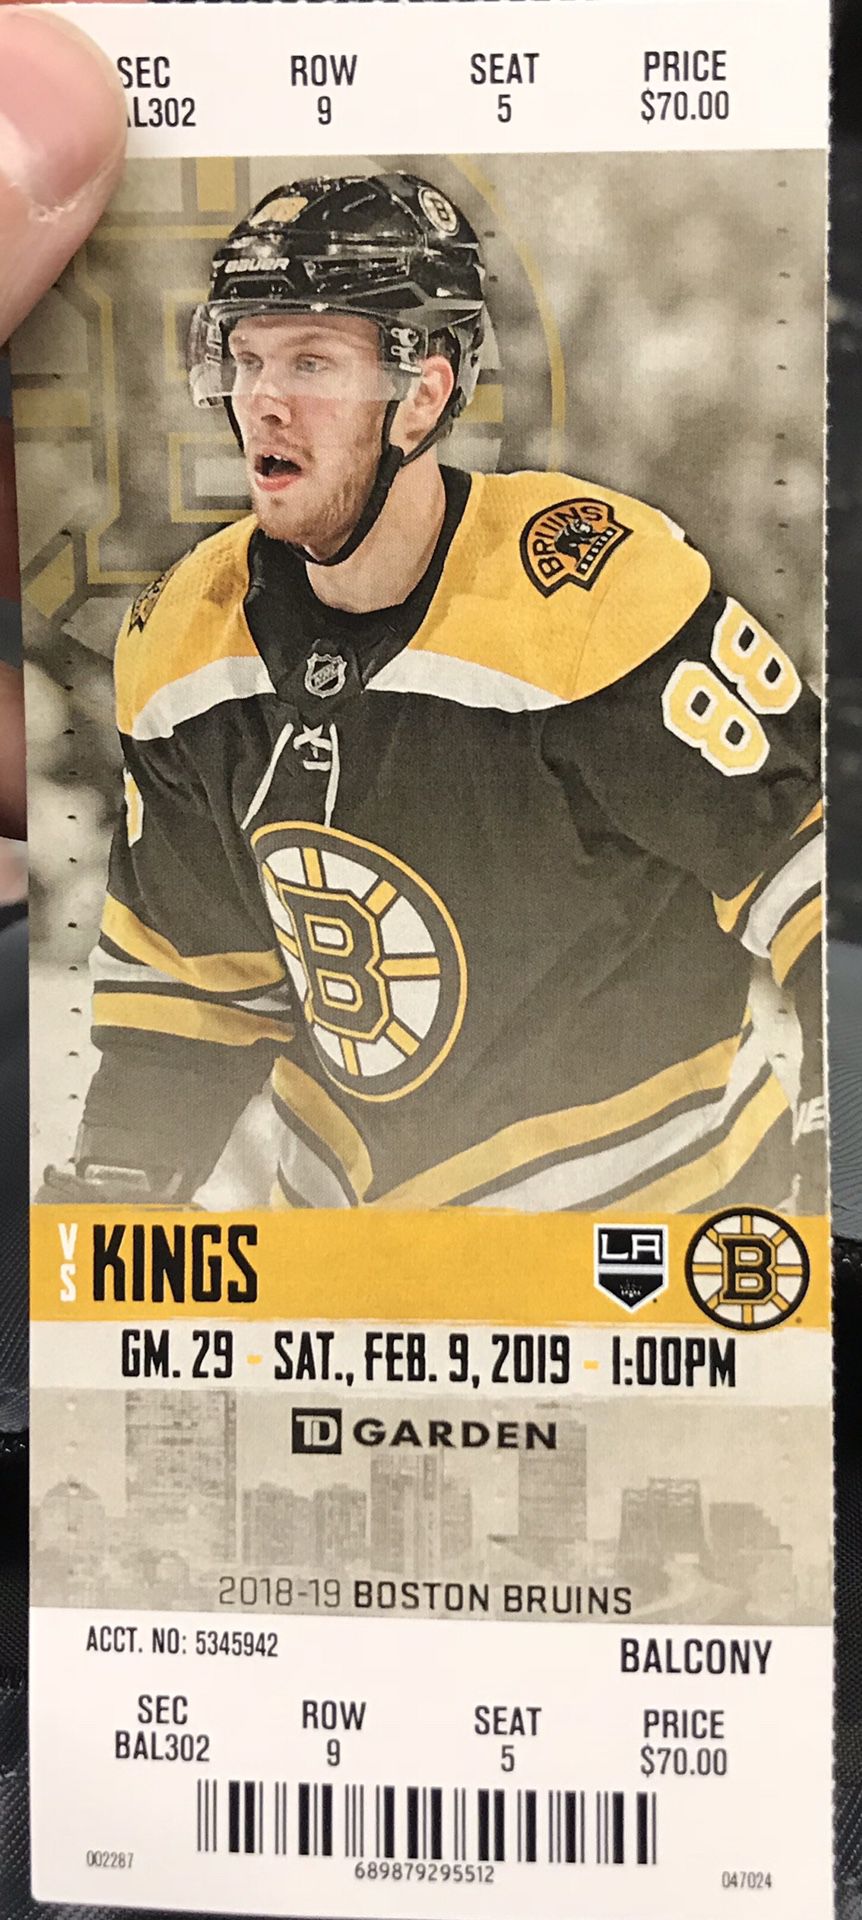 Boston Bruins one ticket for La kings 02/09/19, I only have,ONE SEAT, the face value is 70.00 yours for 50.00 if done before 01/01/2018